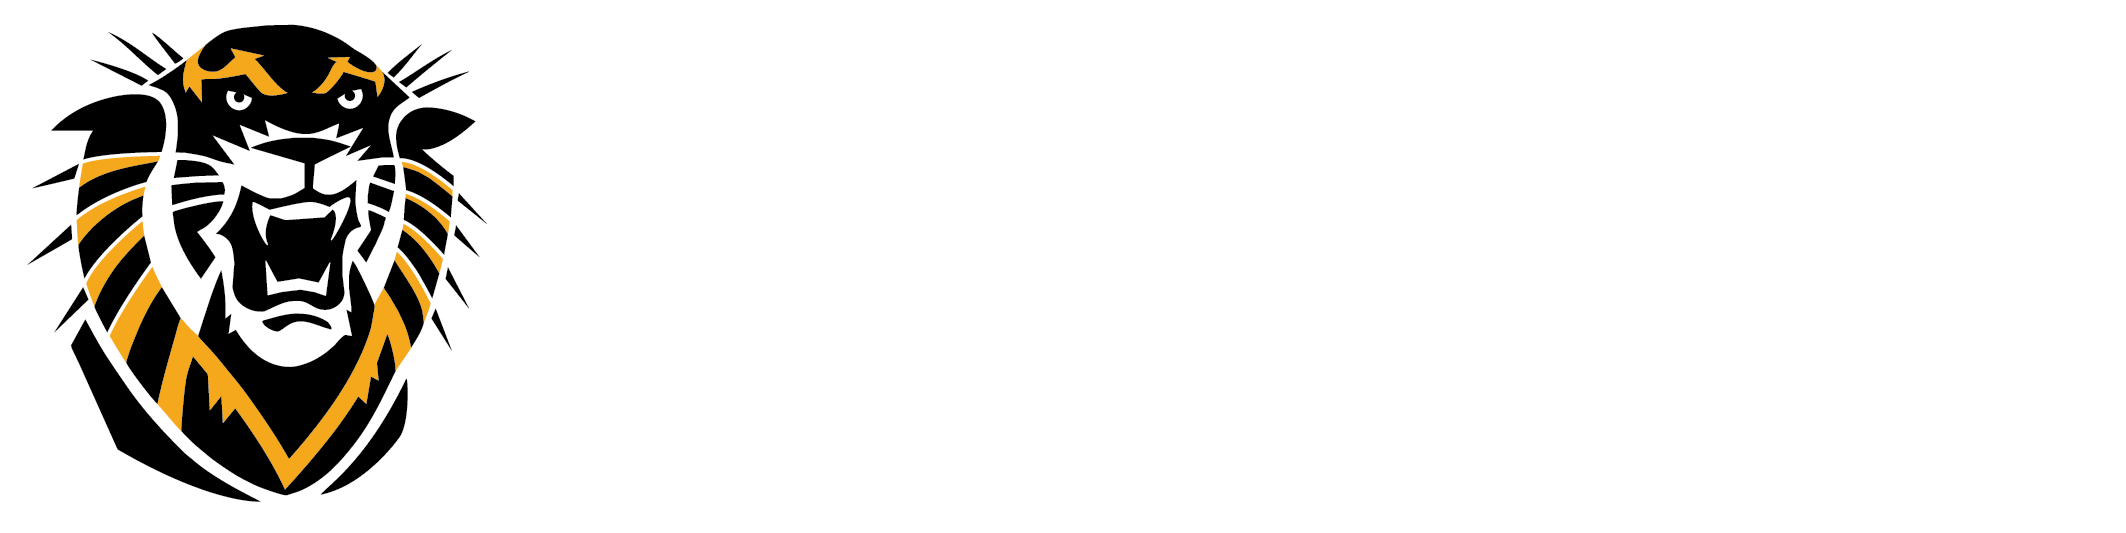 FHSU department logo - 2-color, white text - stacked